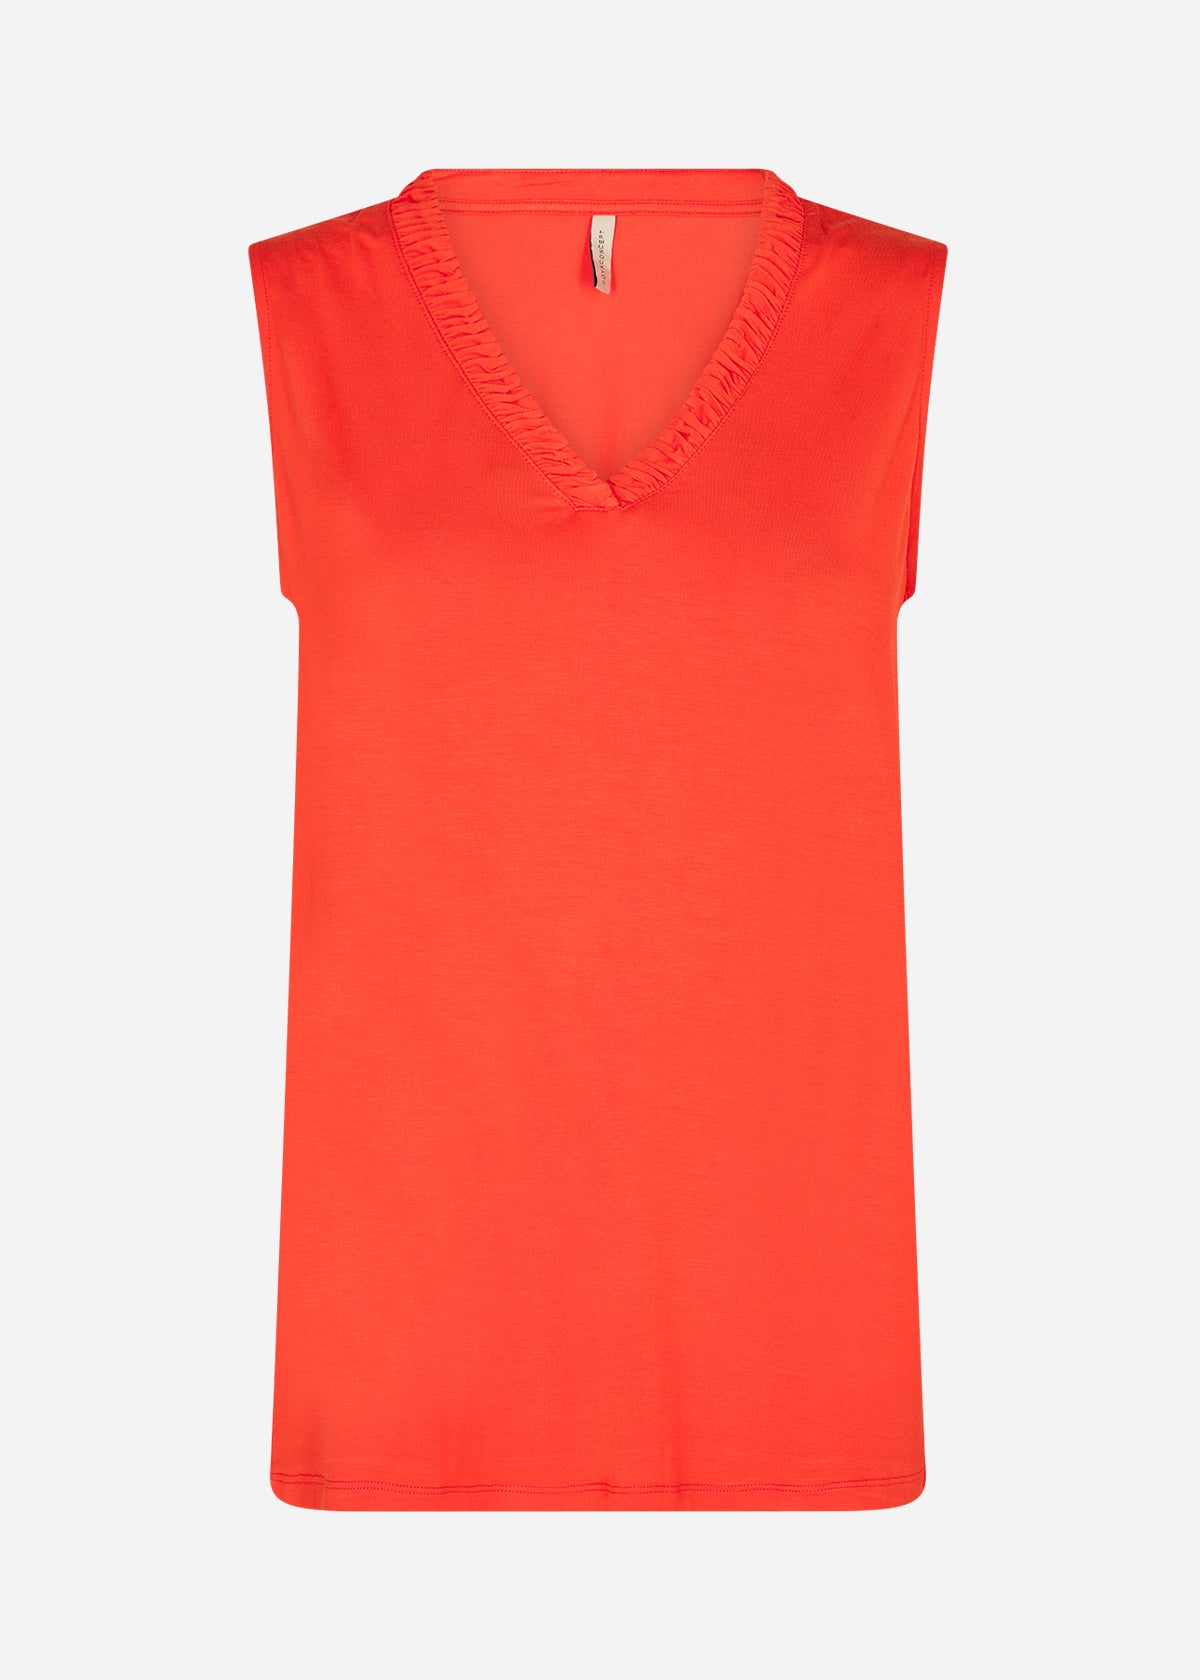 Soya Concept Marica 196 Top in Coral